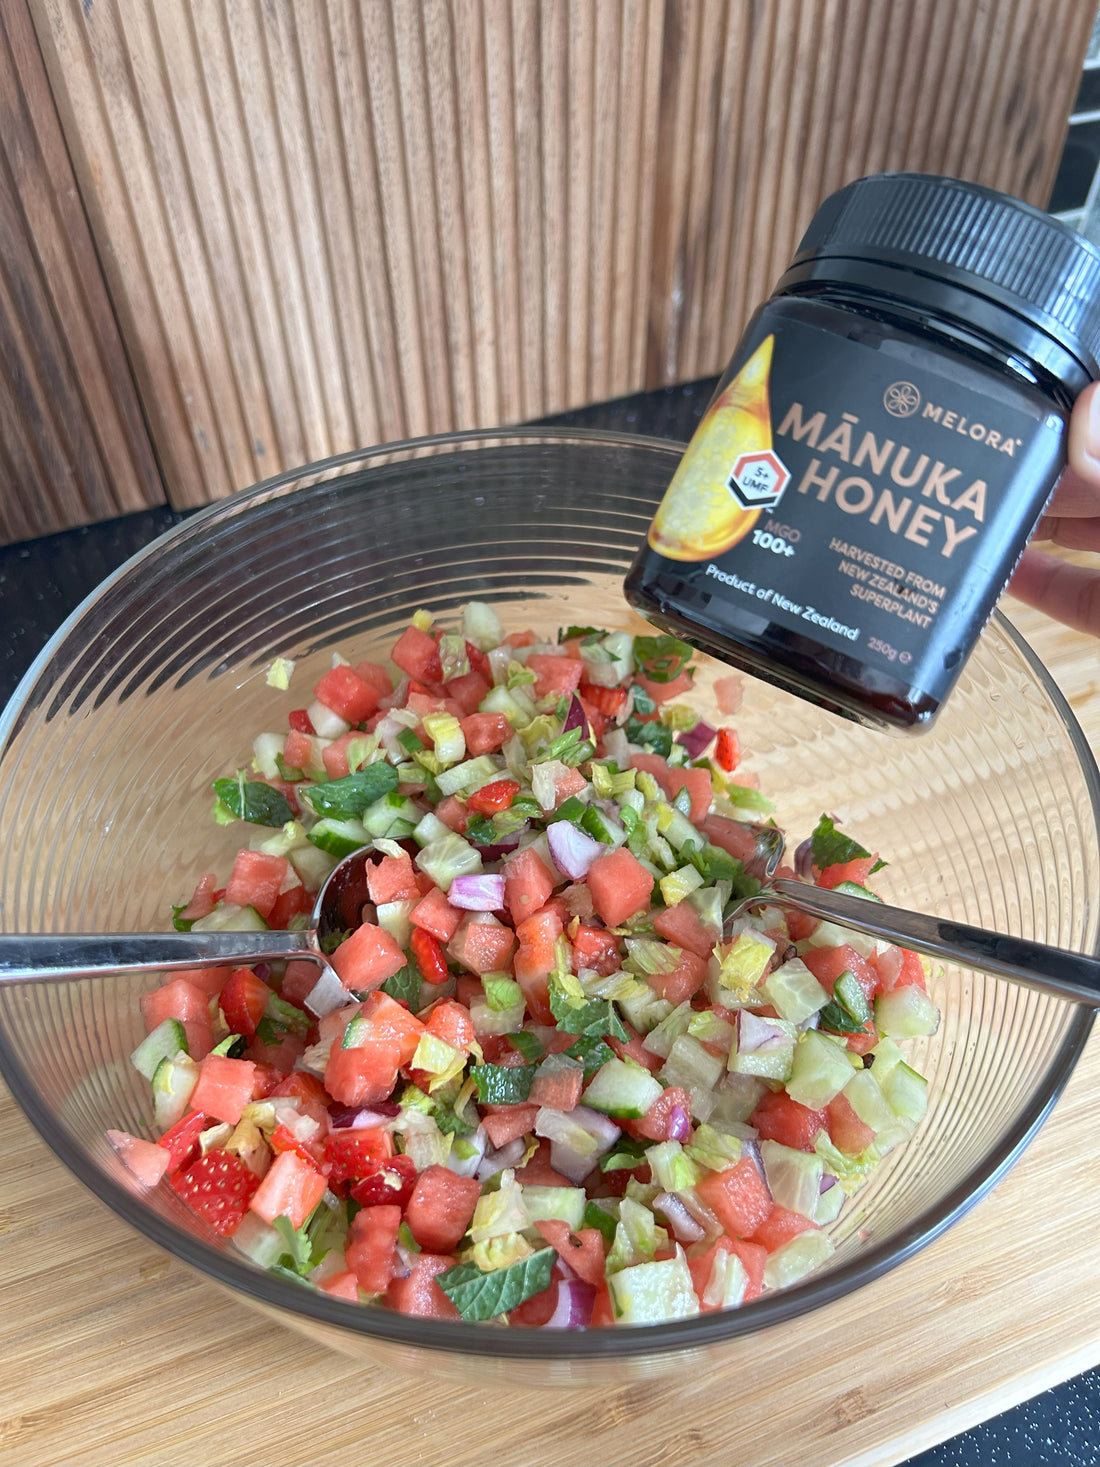 Refreshing Watermelon Salad with Manuka Honey Dressing: Hydration and Wellness in Every Bite